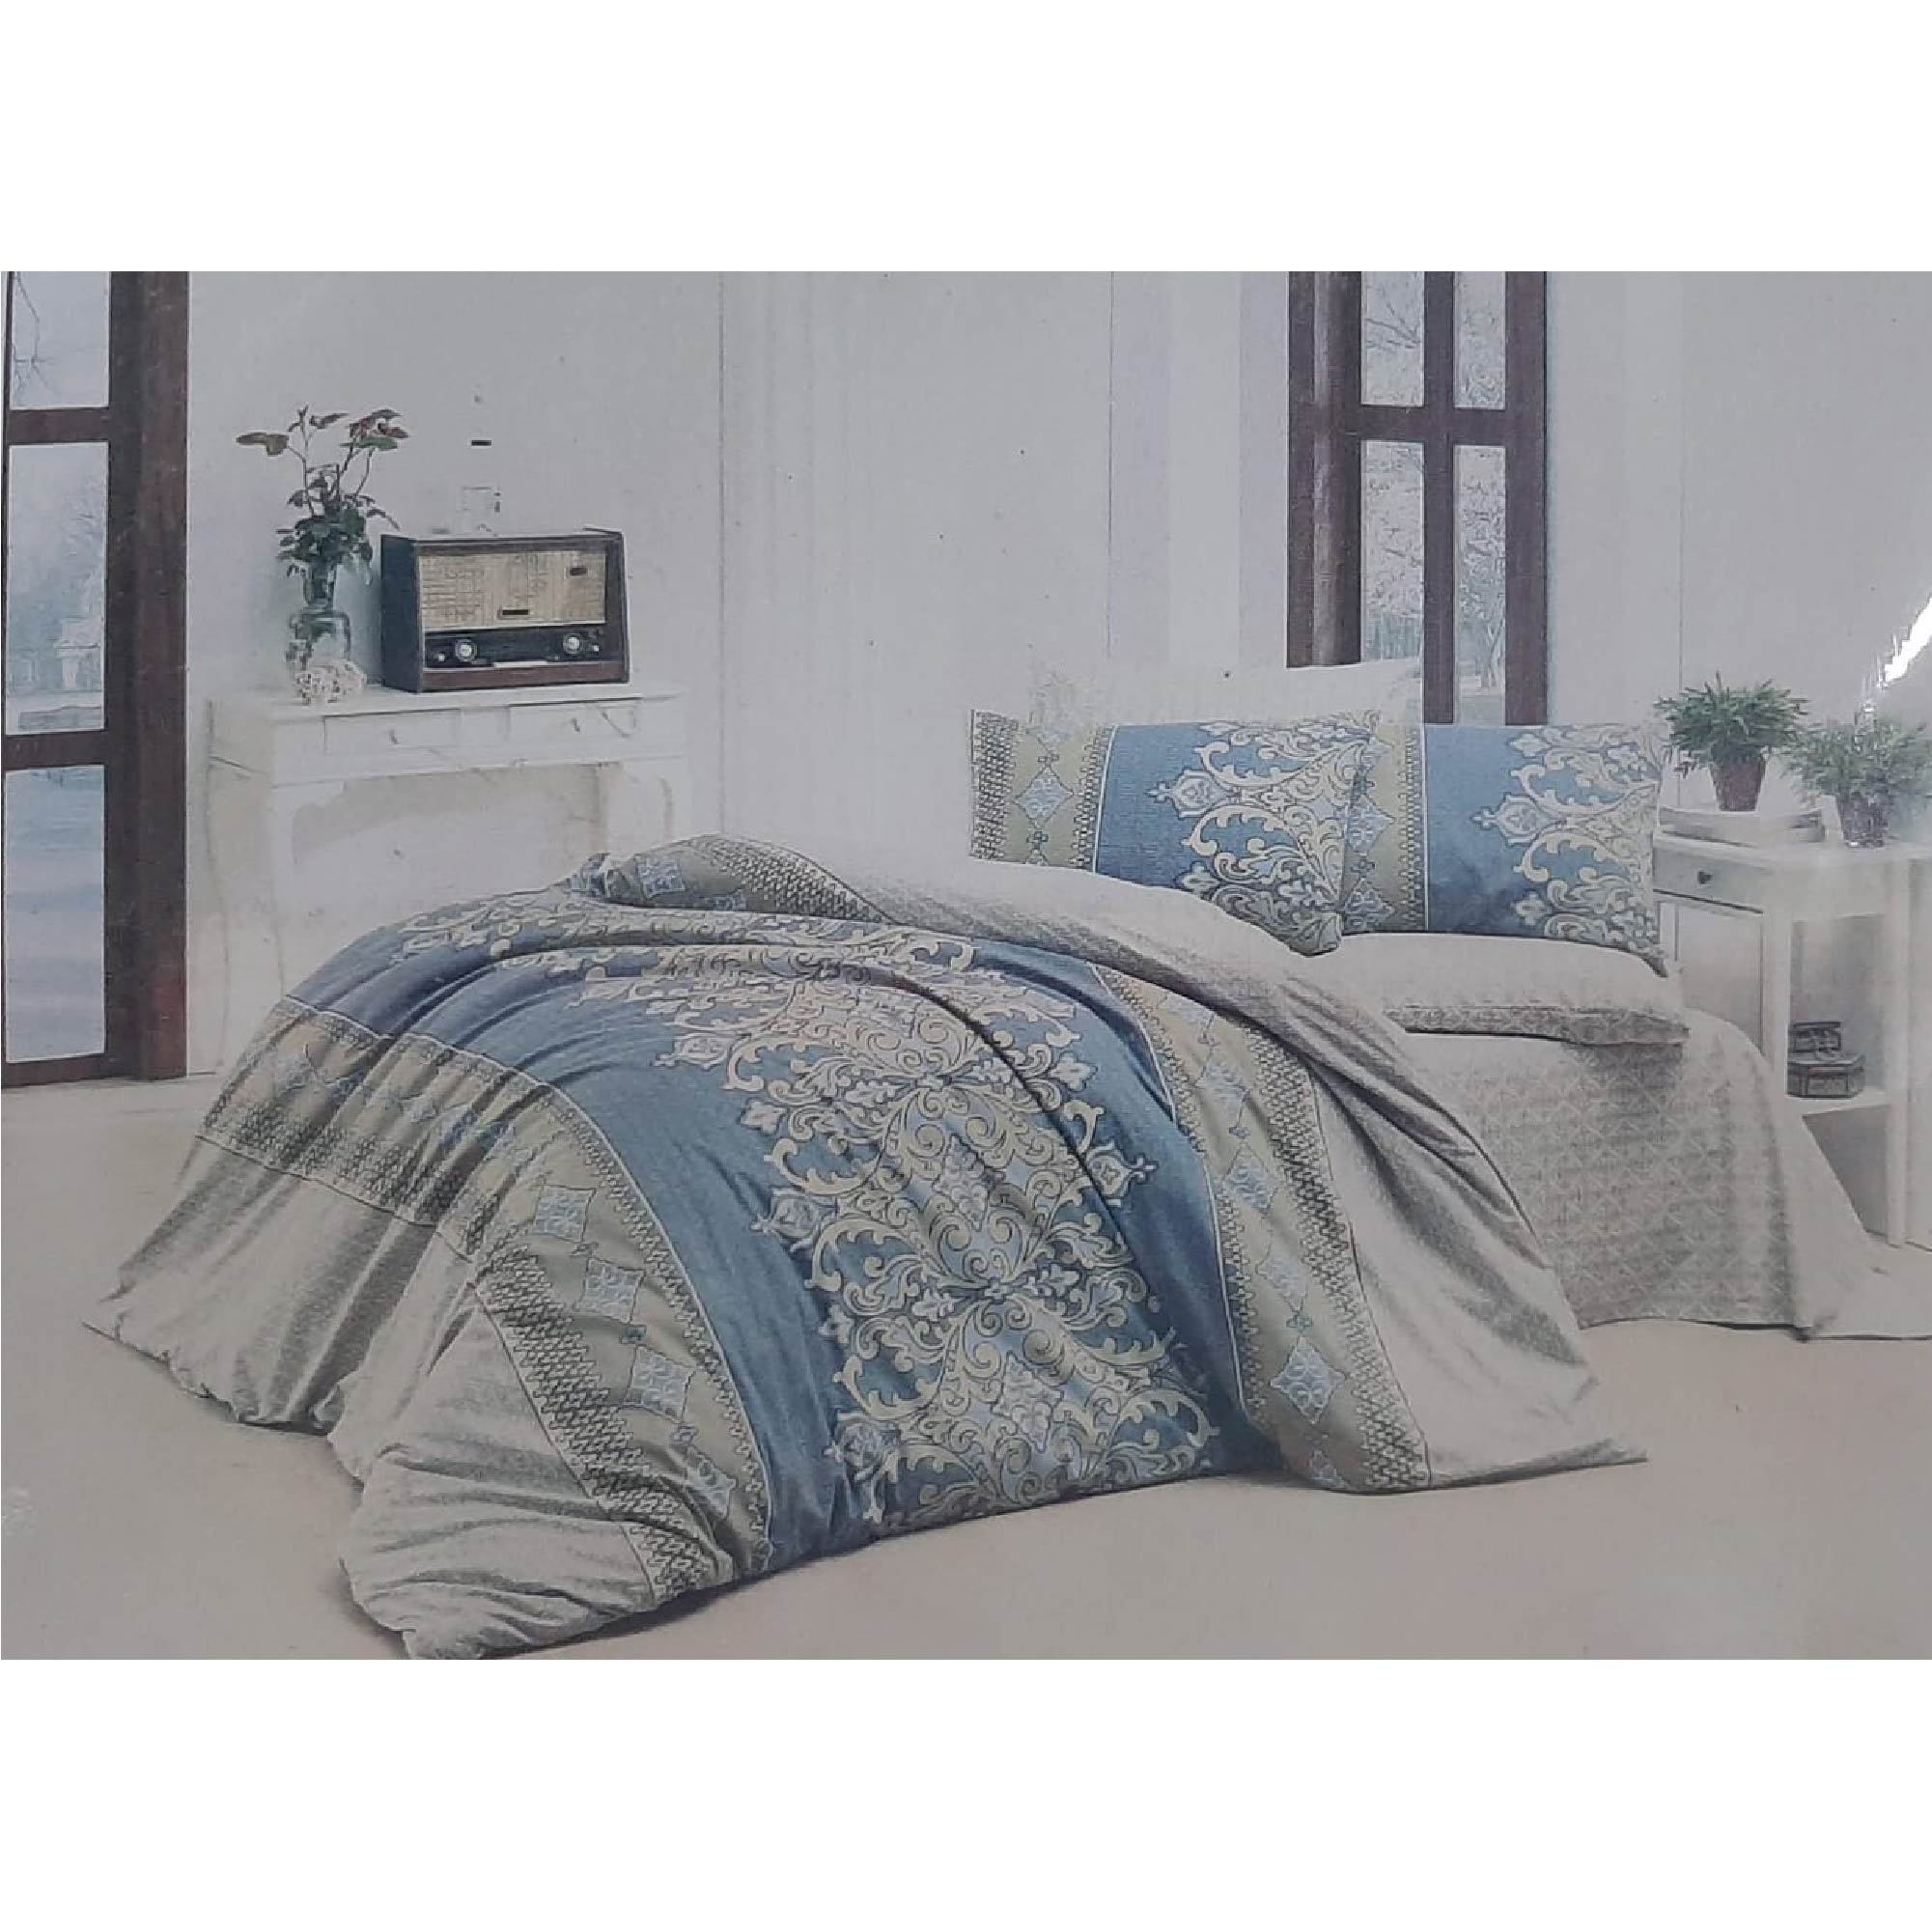 Windsor White/Blue/Grey Luxury Bed Linen Collection Double, WIN-8407WBLG